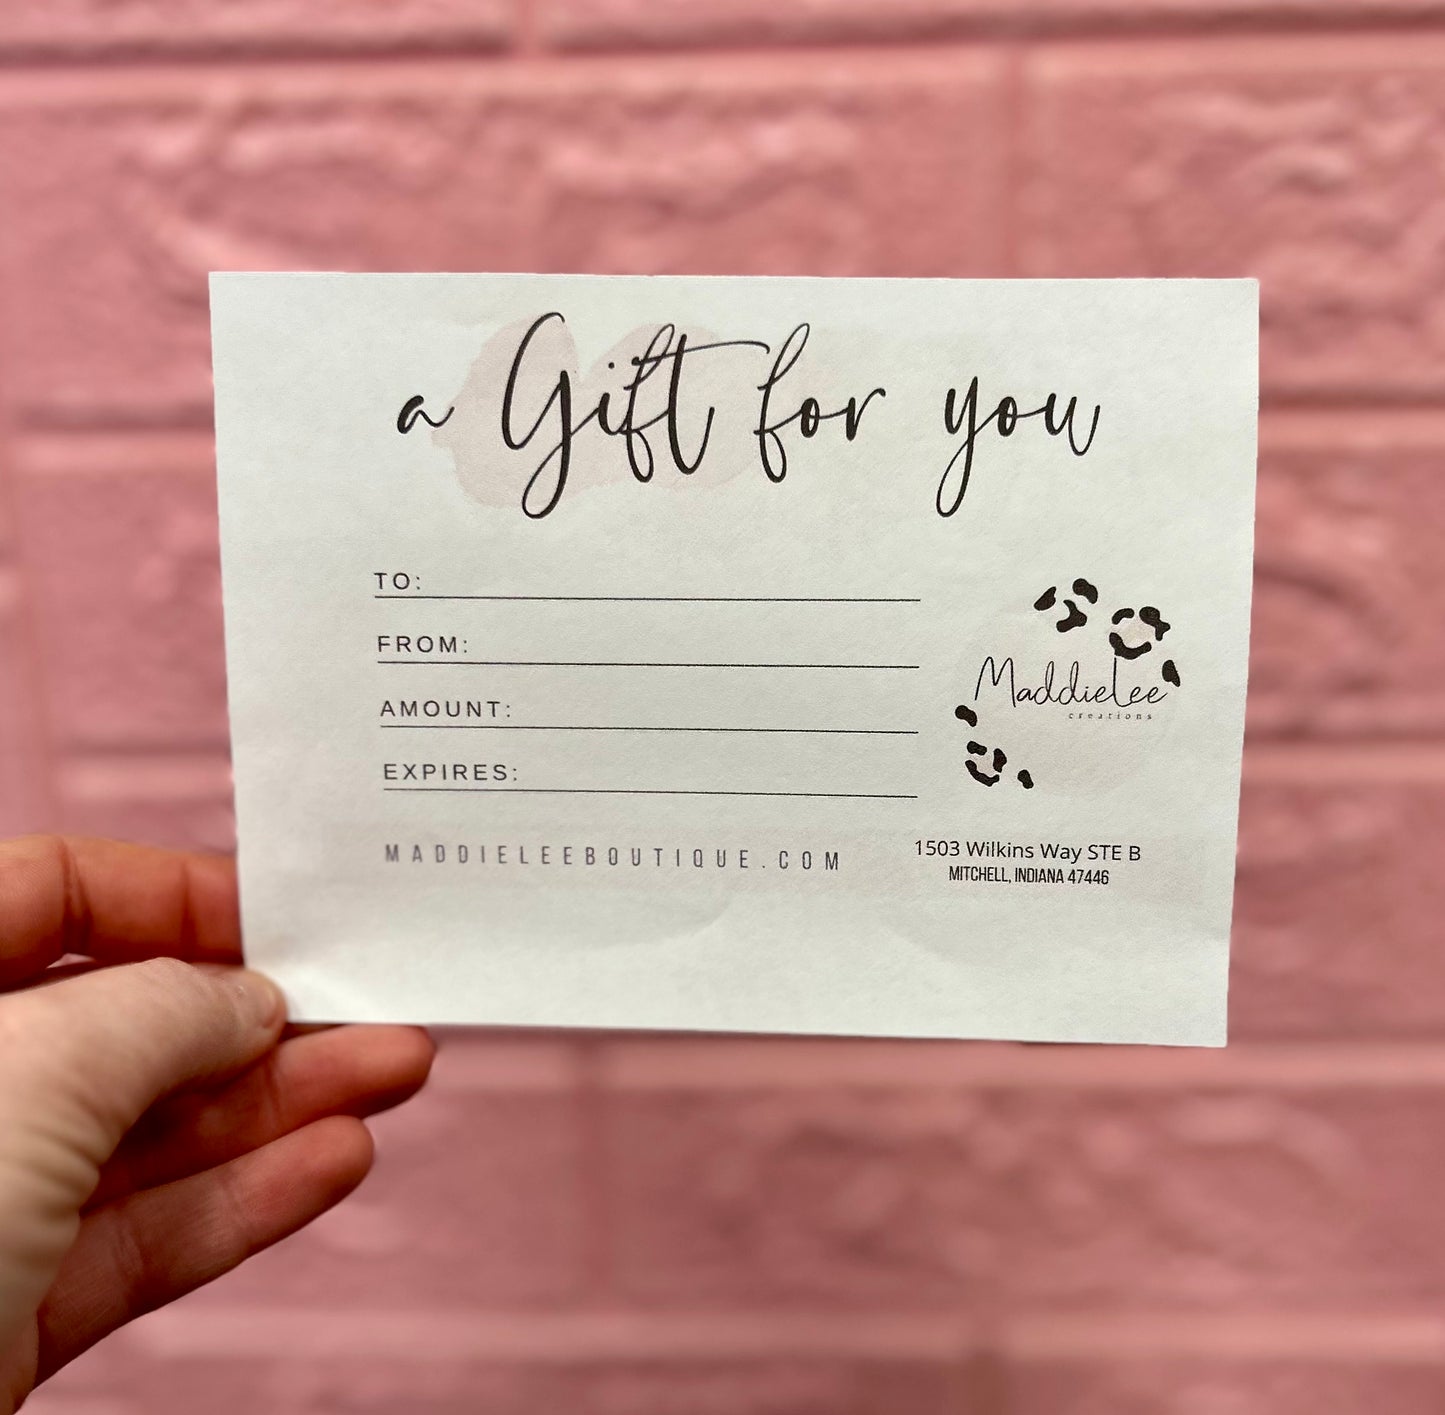 MaddieLee Gift Certificate